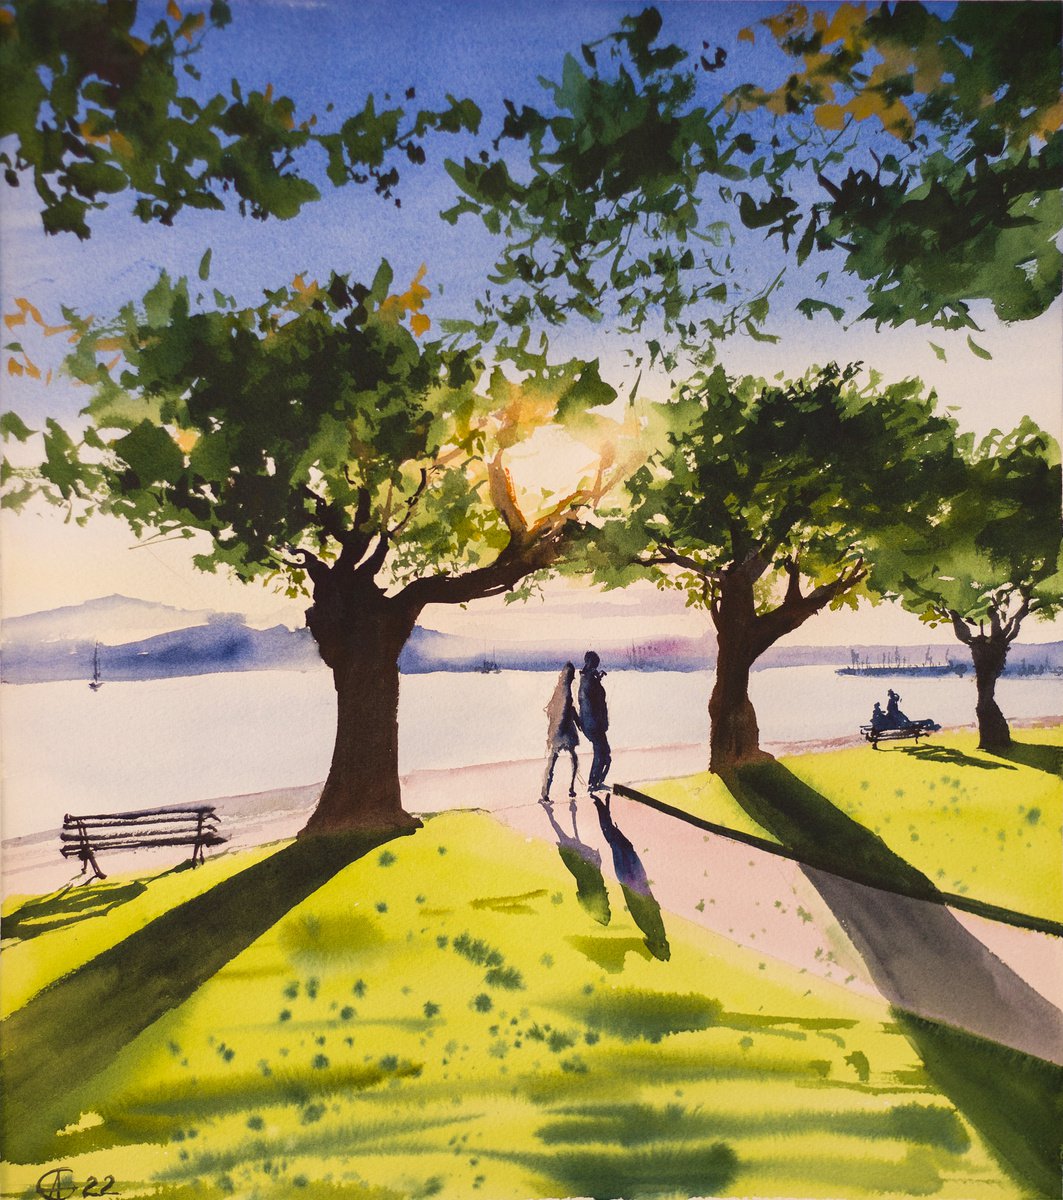 Evening in Zug. Walk near the lake. Switzerland nature sunset landscape watercolor mood in... by Sasha Romm